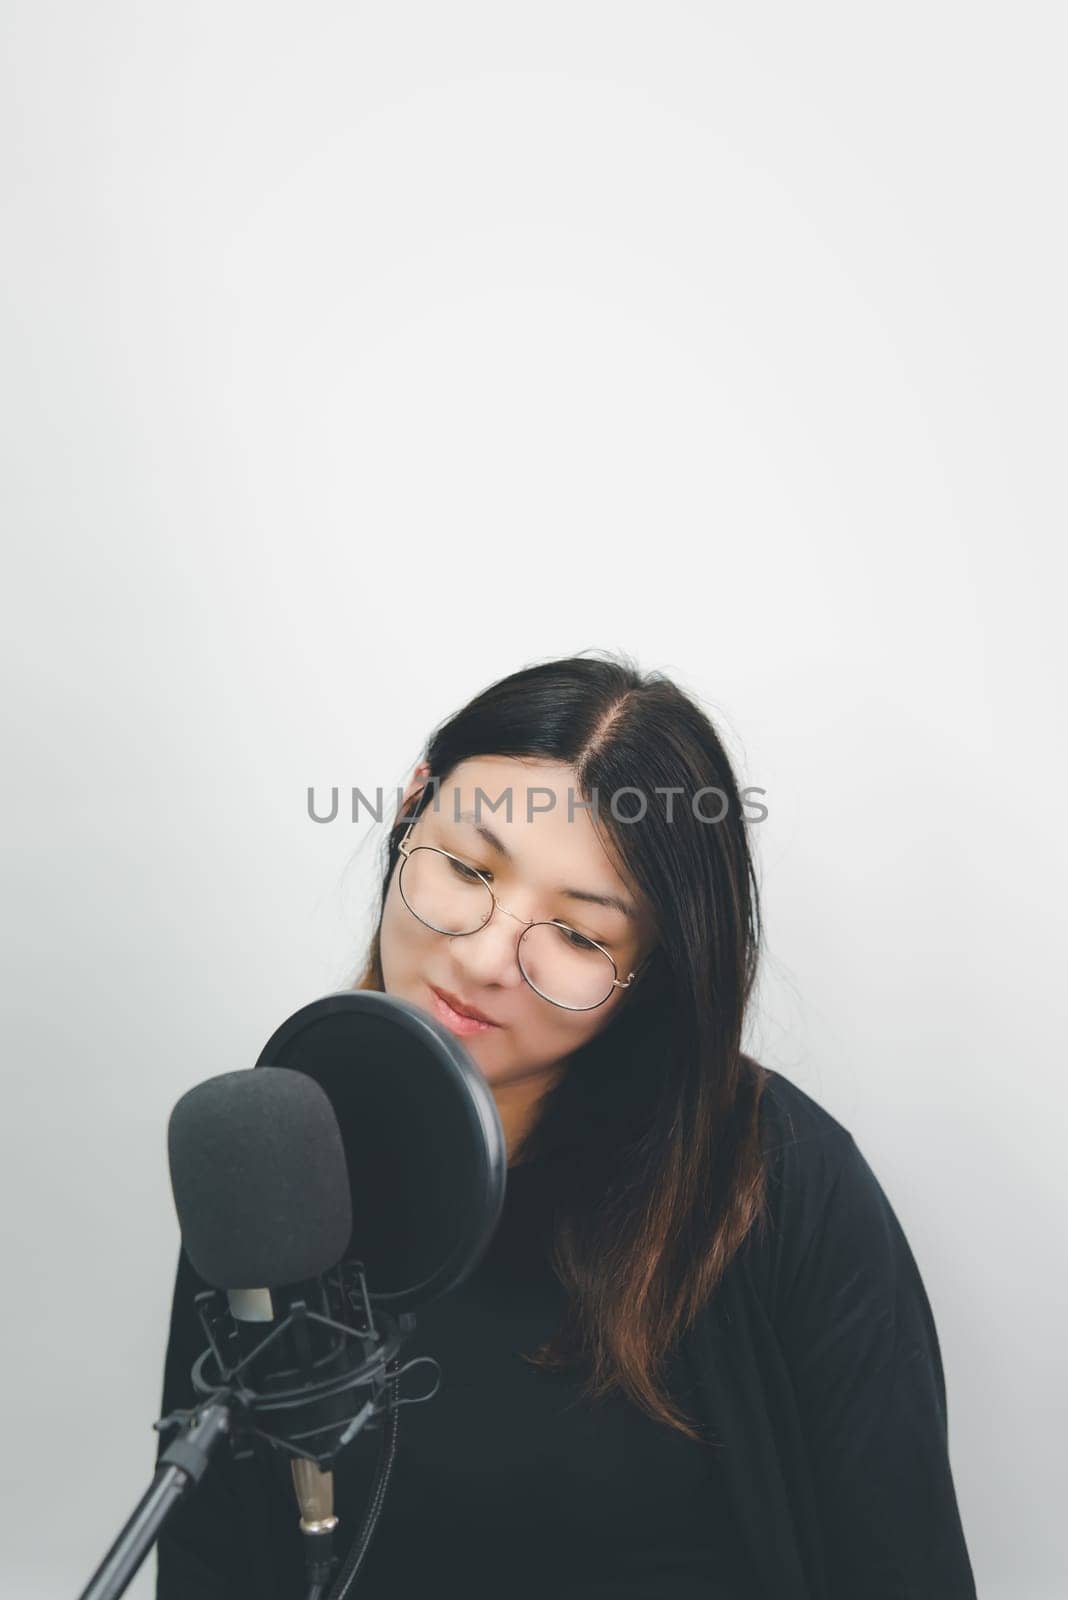 Beautiful asian woman (LGBTQ) is a singer. She enjoying sing a song or karaoke in music studio with microphone condenser and headphones for fun or voice creative